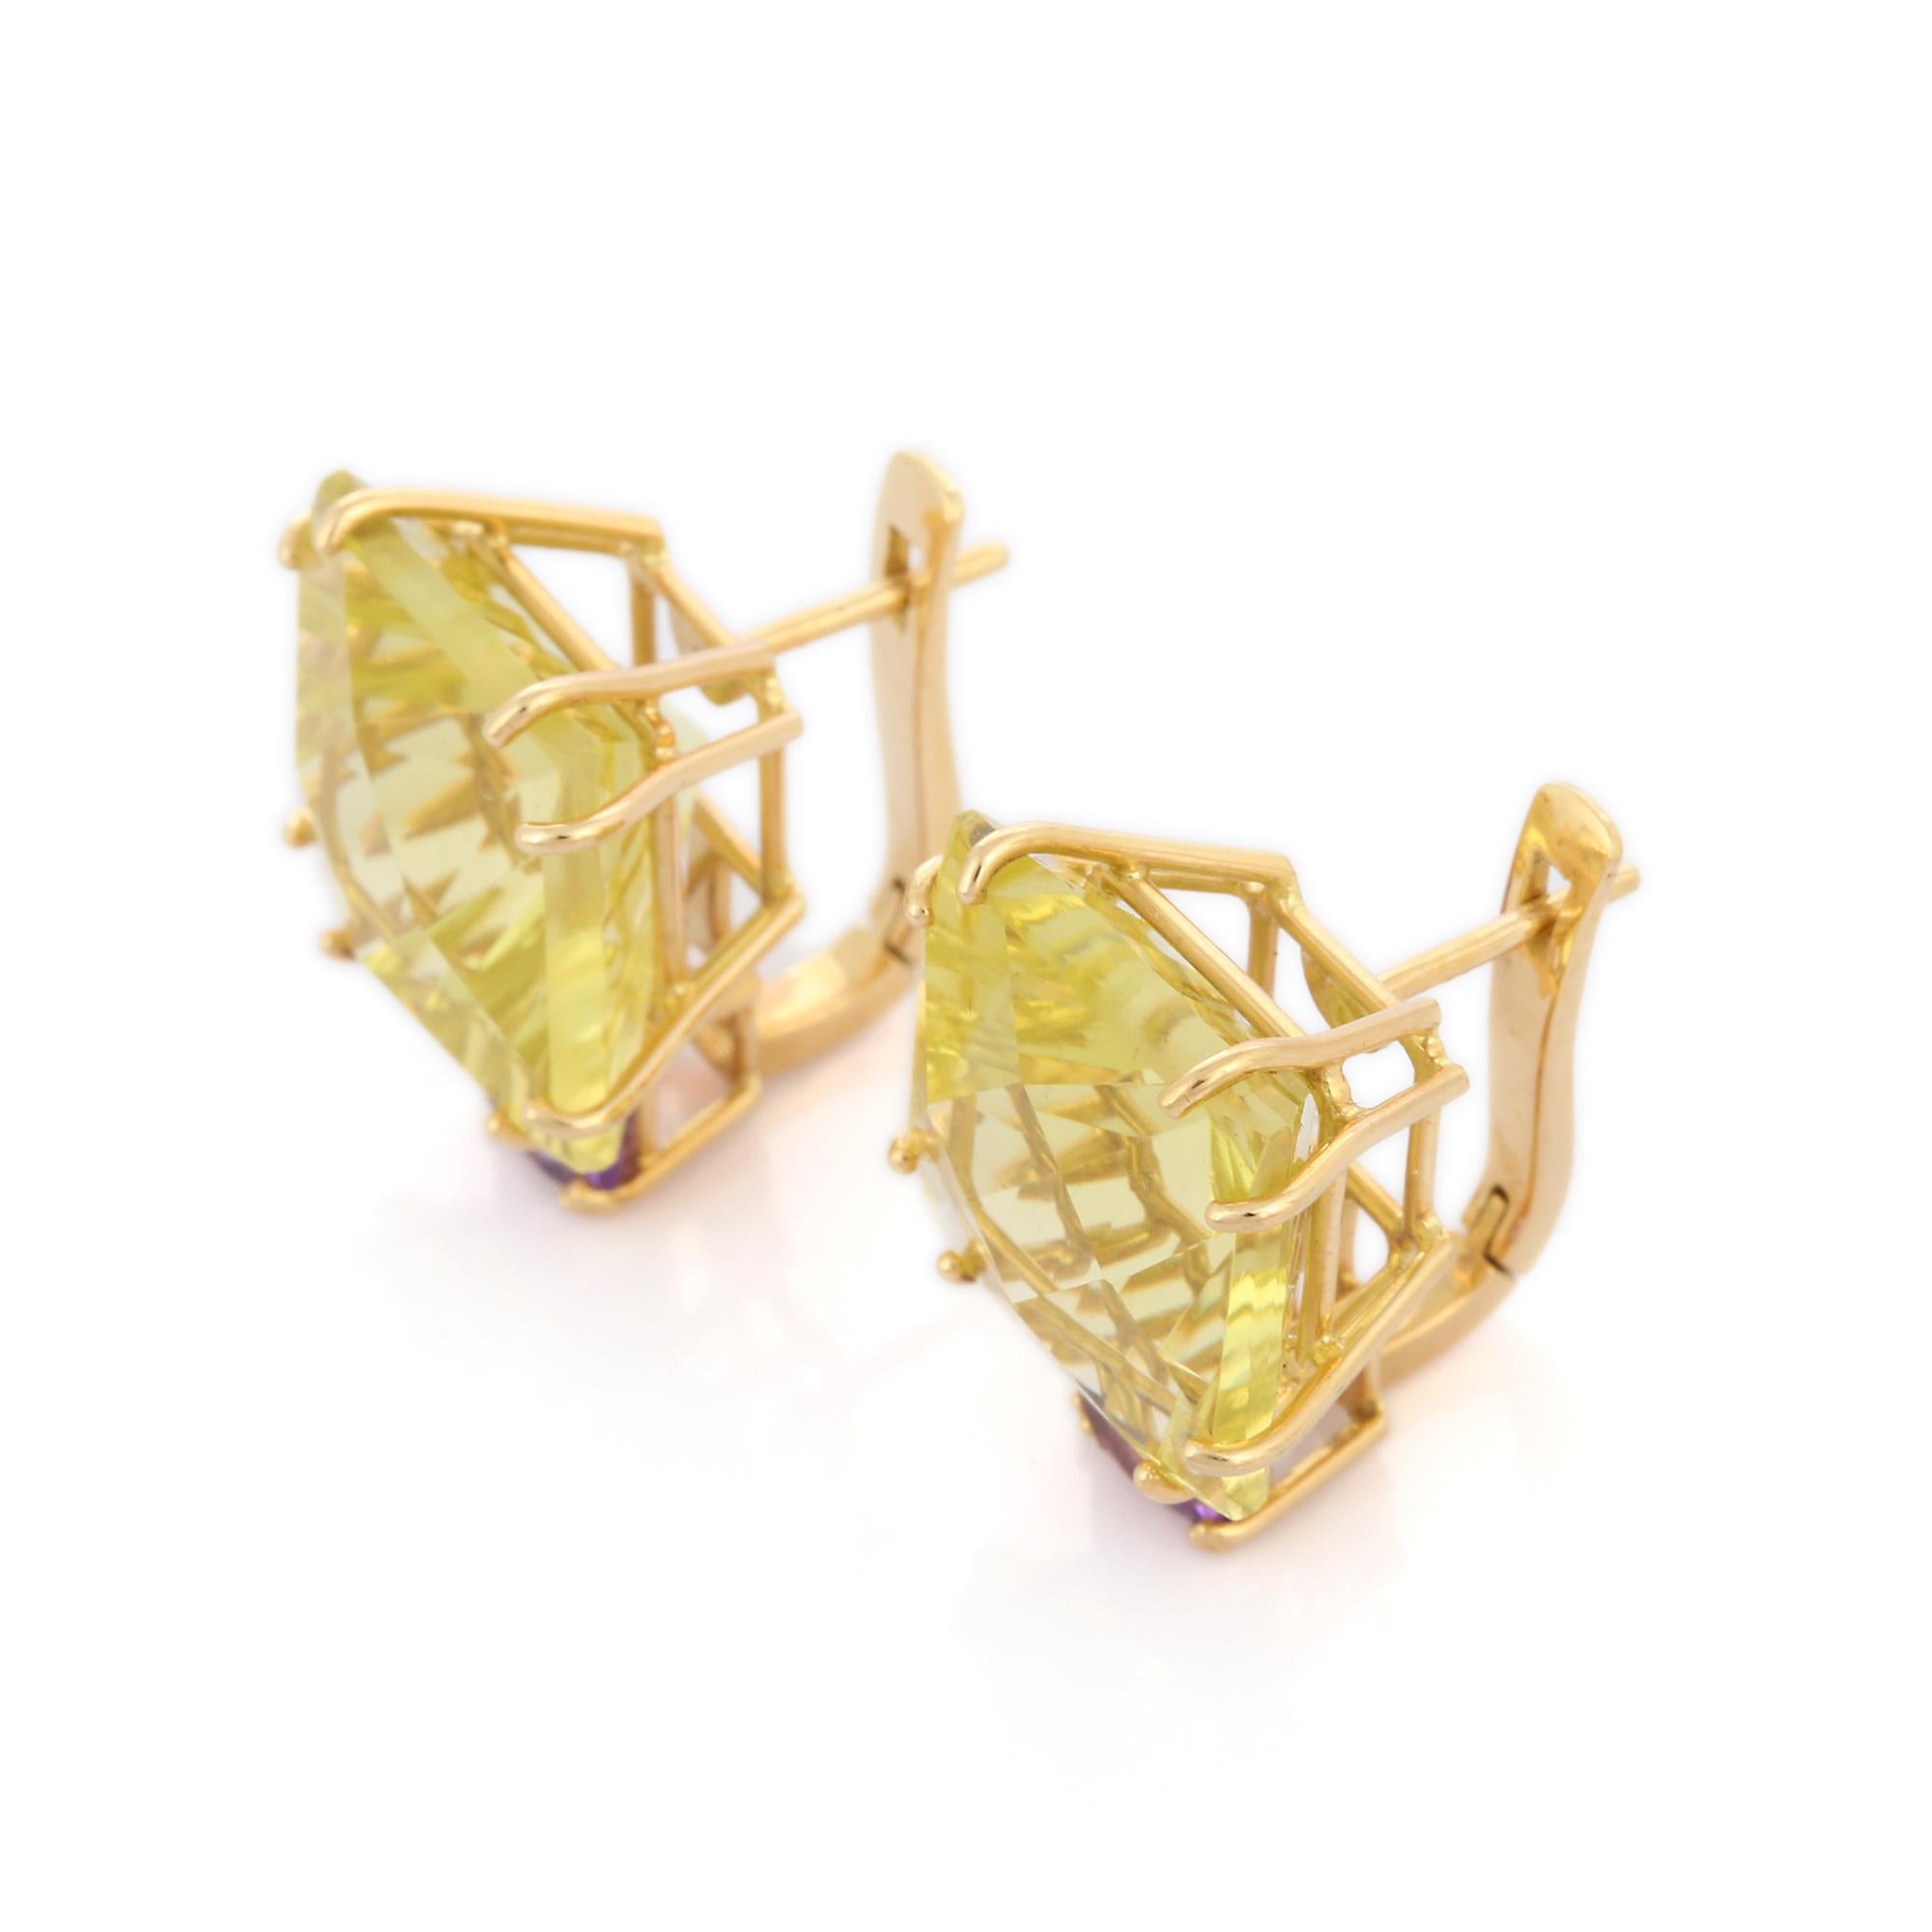 Studs create a subtle beauty while showcasing the colors of the natural precious gemstones making a statement.

Square cut lemon topaz studs with amethyst in 18K gold. Embrace your look with these stunning pair of earrings suitable for any occasion